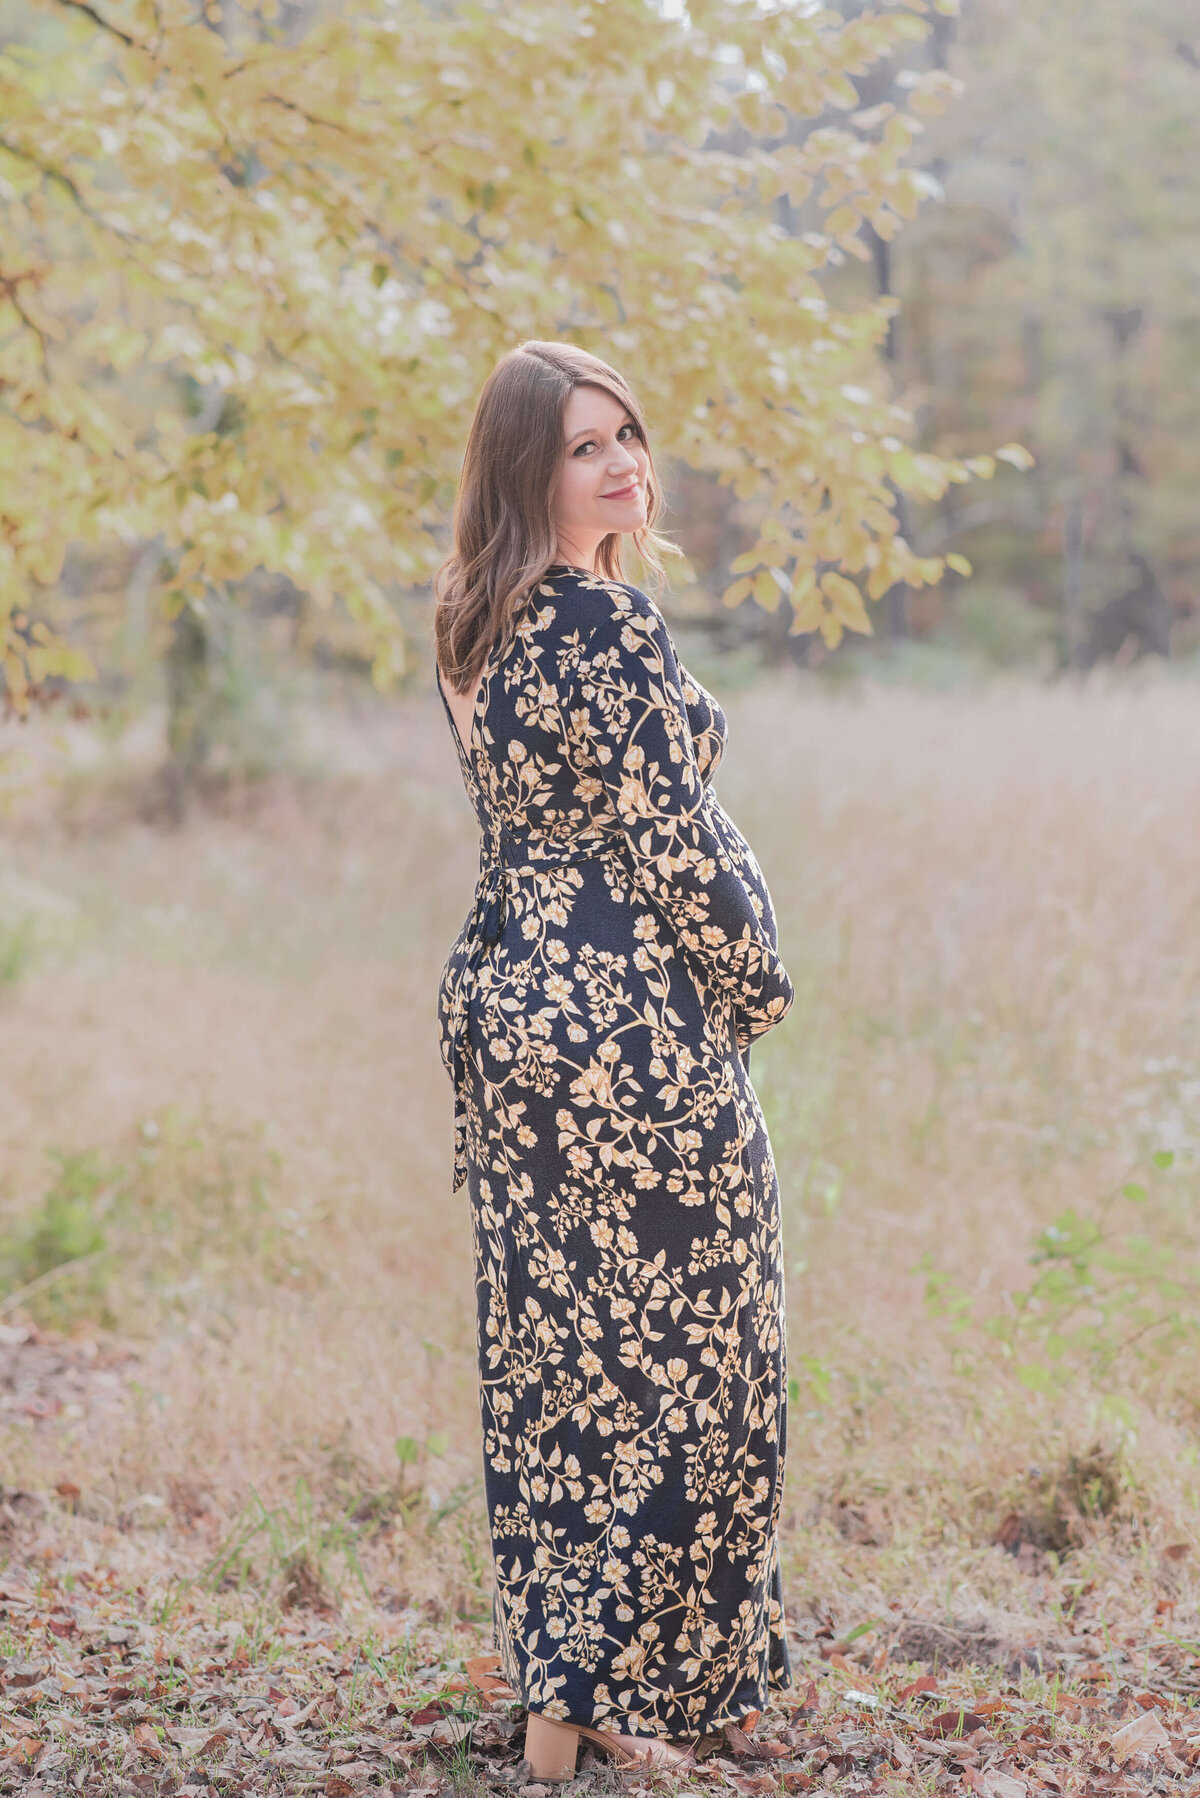 mom to be on a field with tall grass and fall leaves surround it